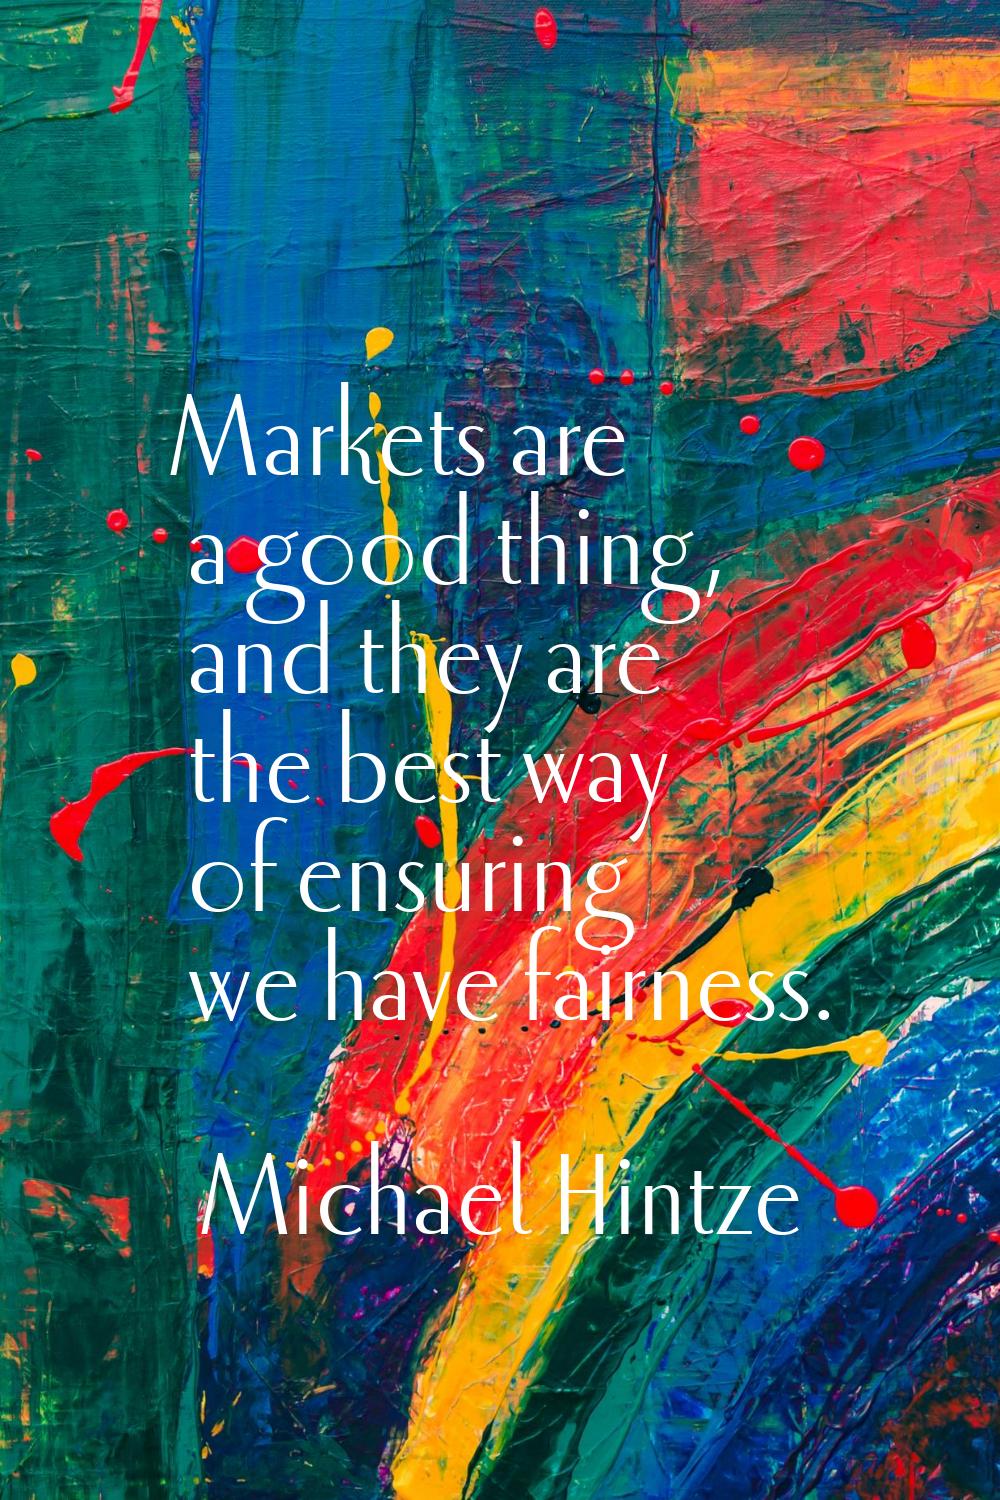 Markets are a good thing, and they are the best way of ensuring we have fairness.